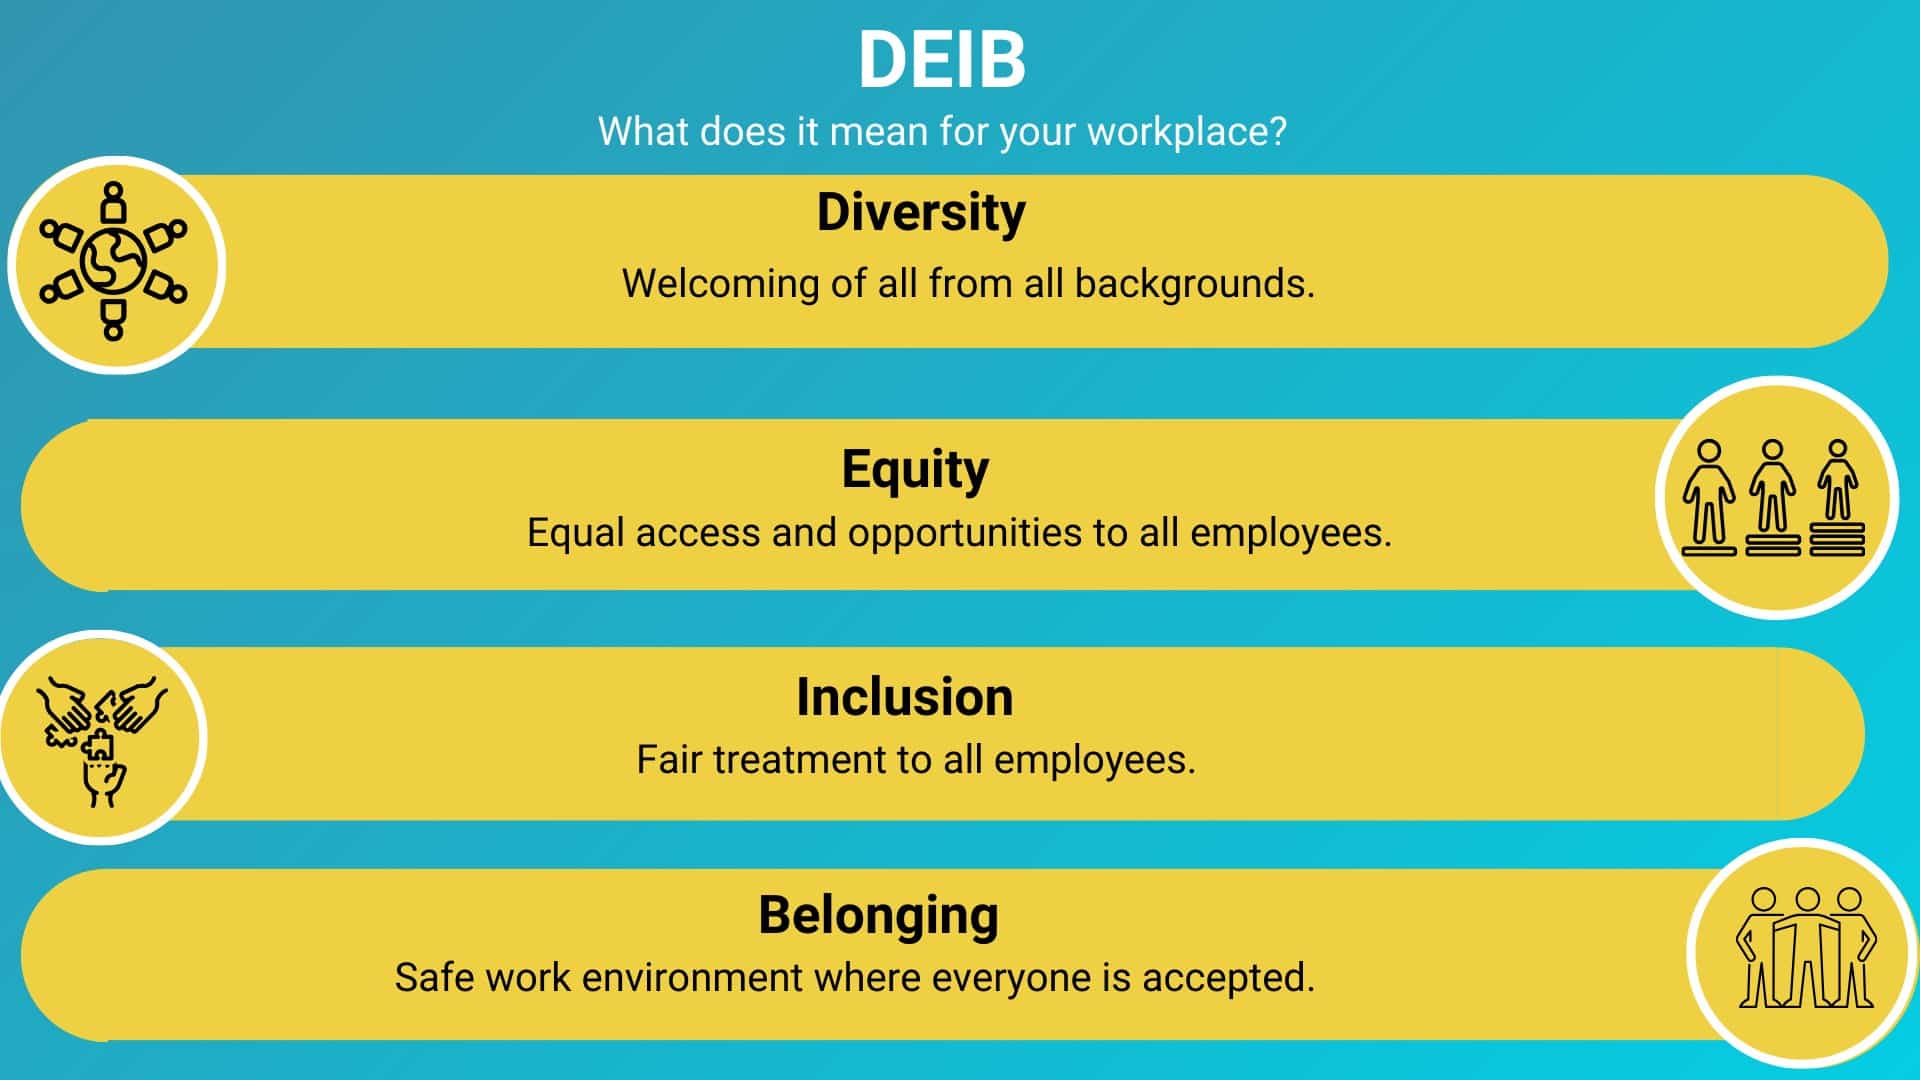 Featured image for “Defining DEIB: More Than Just Acronyms”